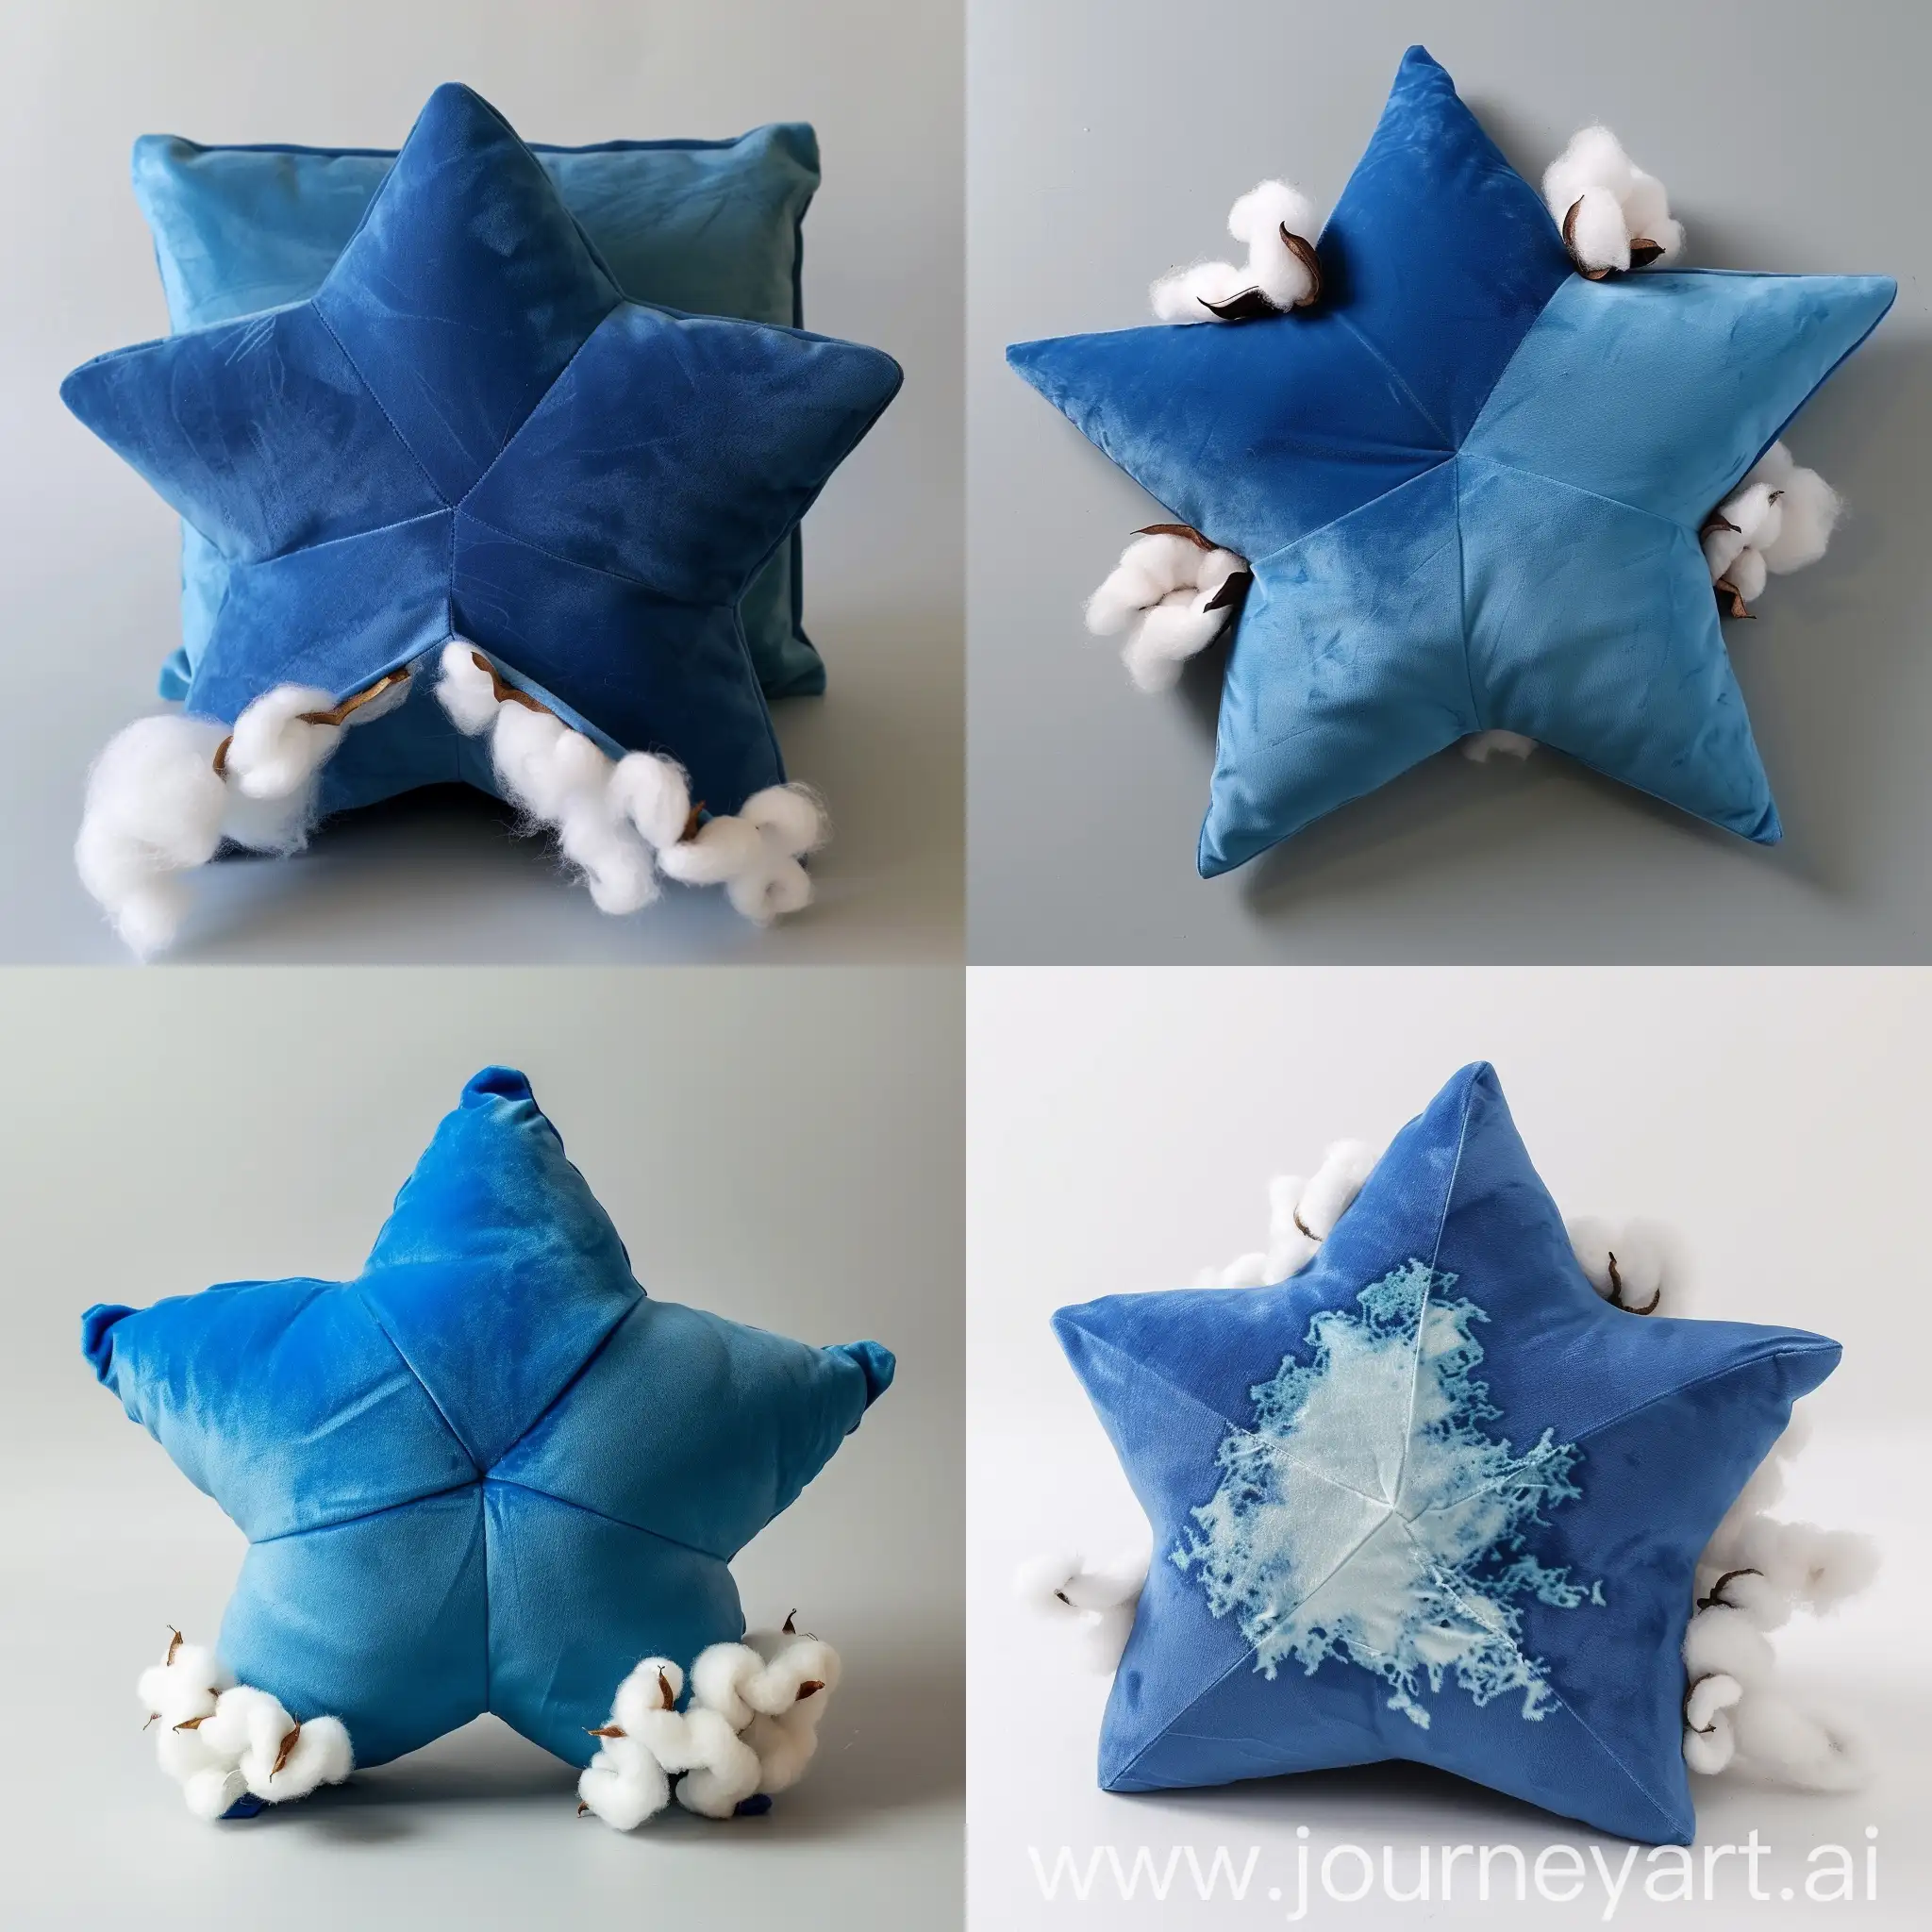 Blue-Starshaped-Pillow-with-Emerging-White-Cotton